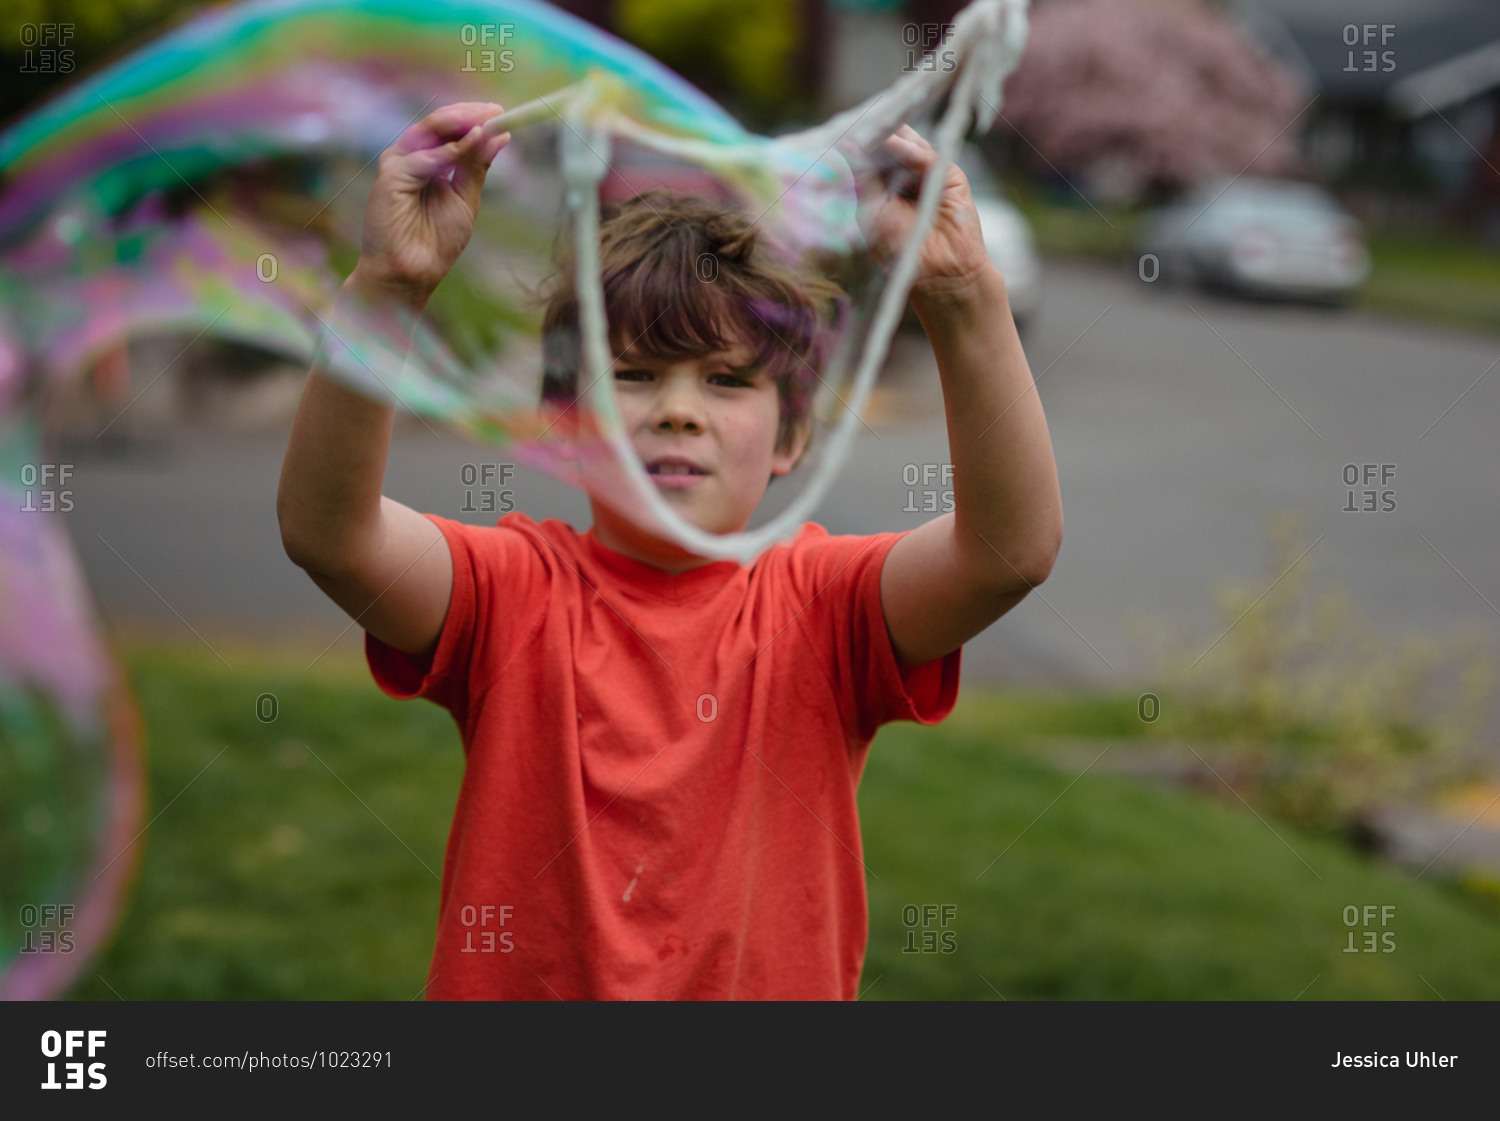 Boy playing with a large bubble wand